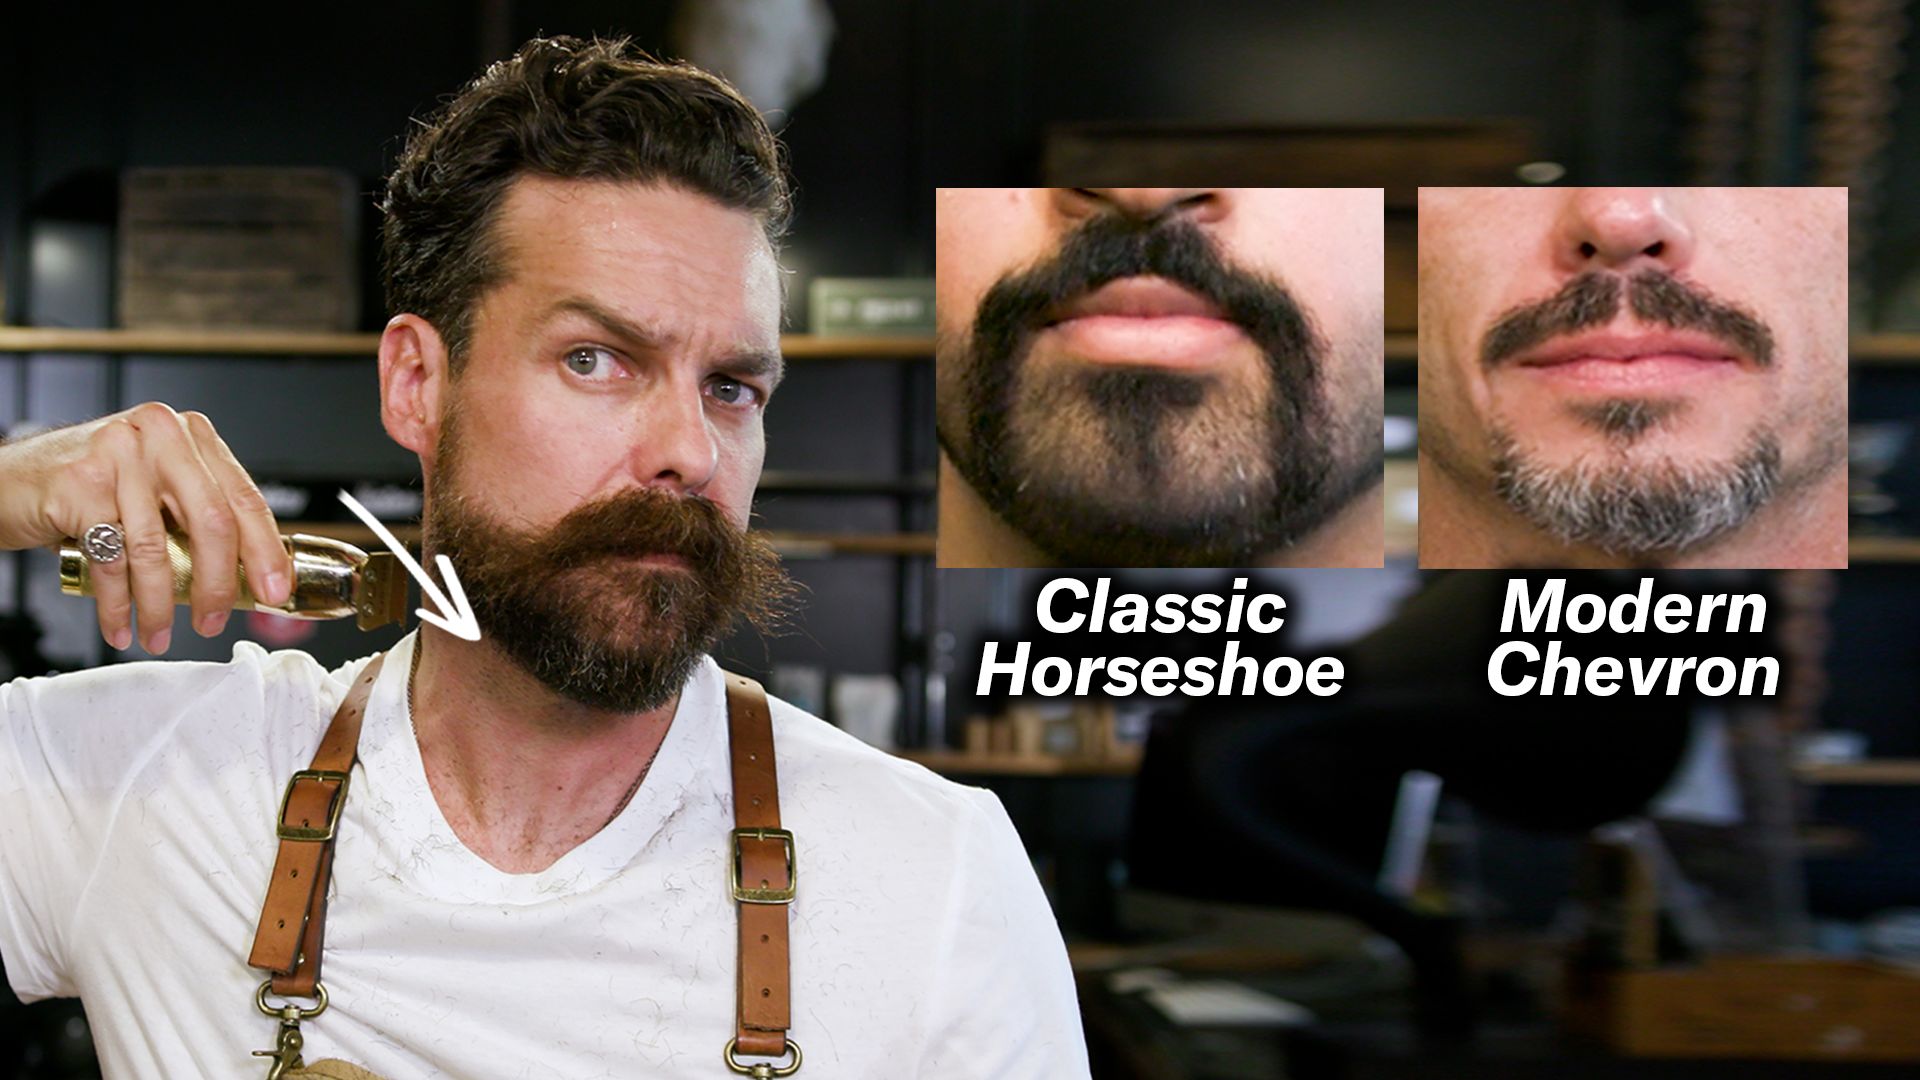 Watch 7 Ways To Shave & Style A Mustache | Grooming | GQ